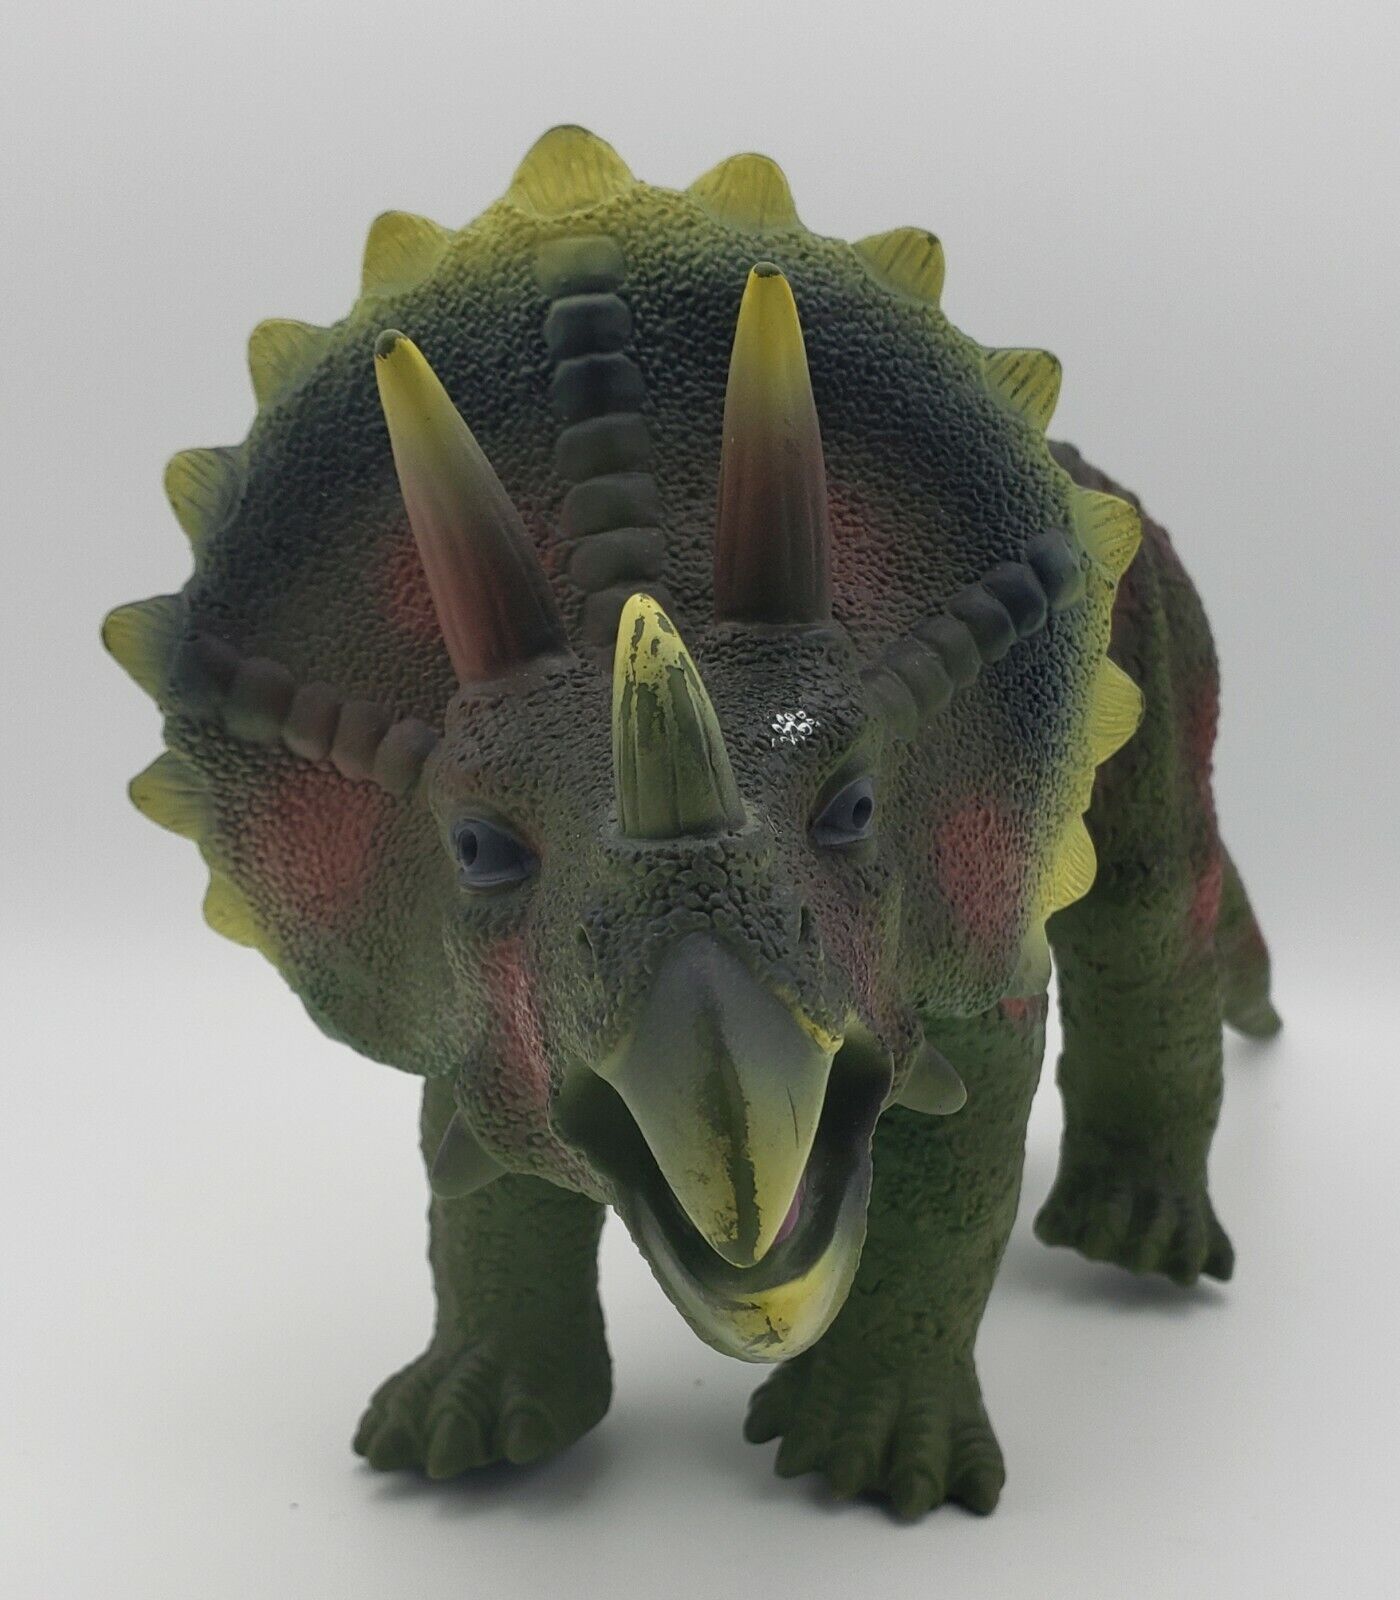 Triceratops Dinosaur 17" Rubber Action Figure Toy Maidenhead T1208c Toys R Us